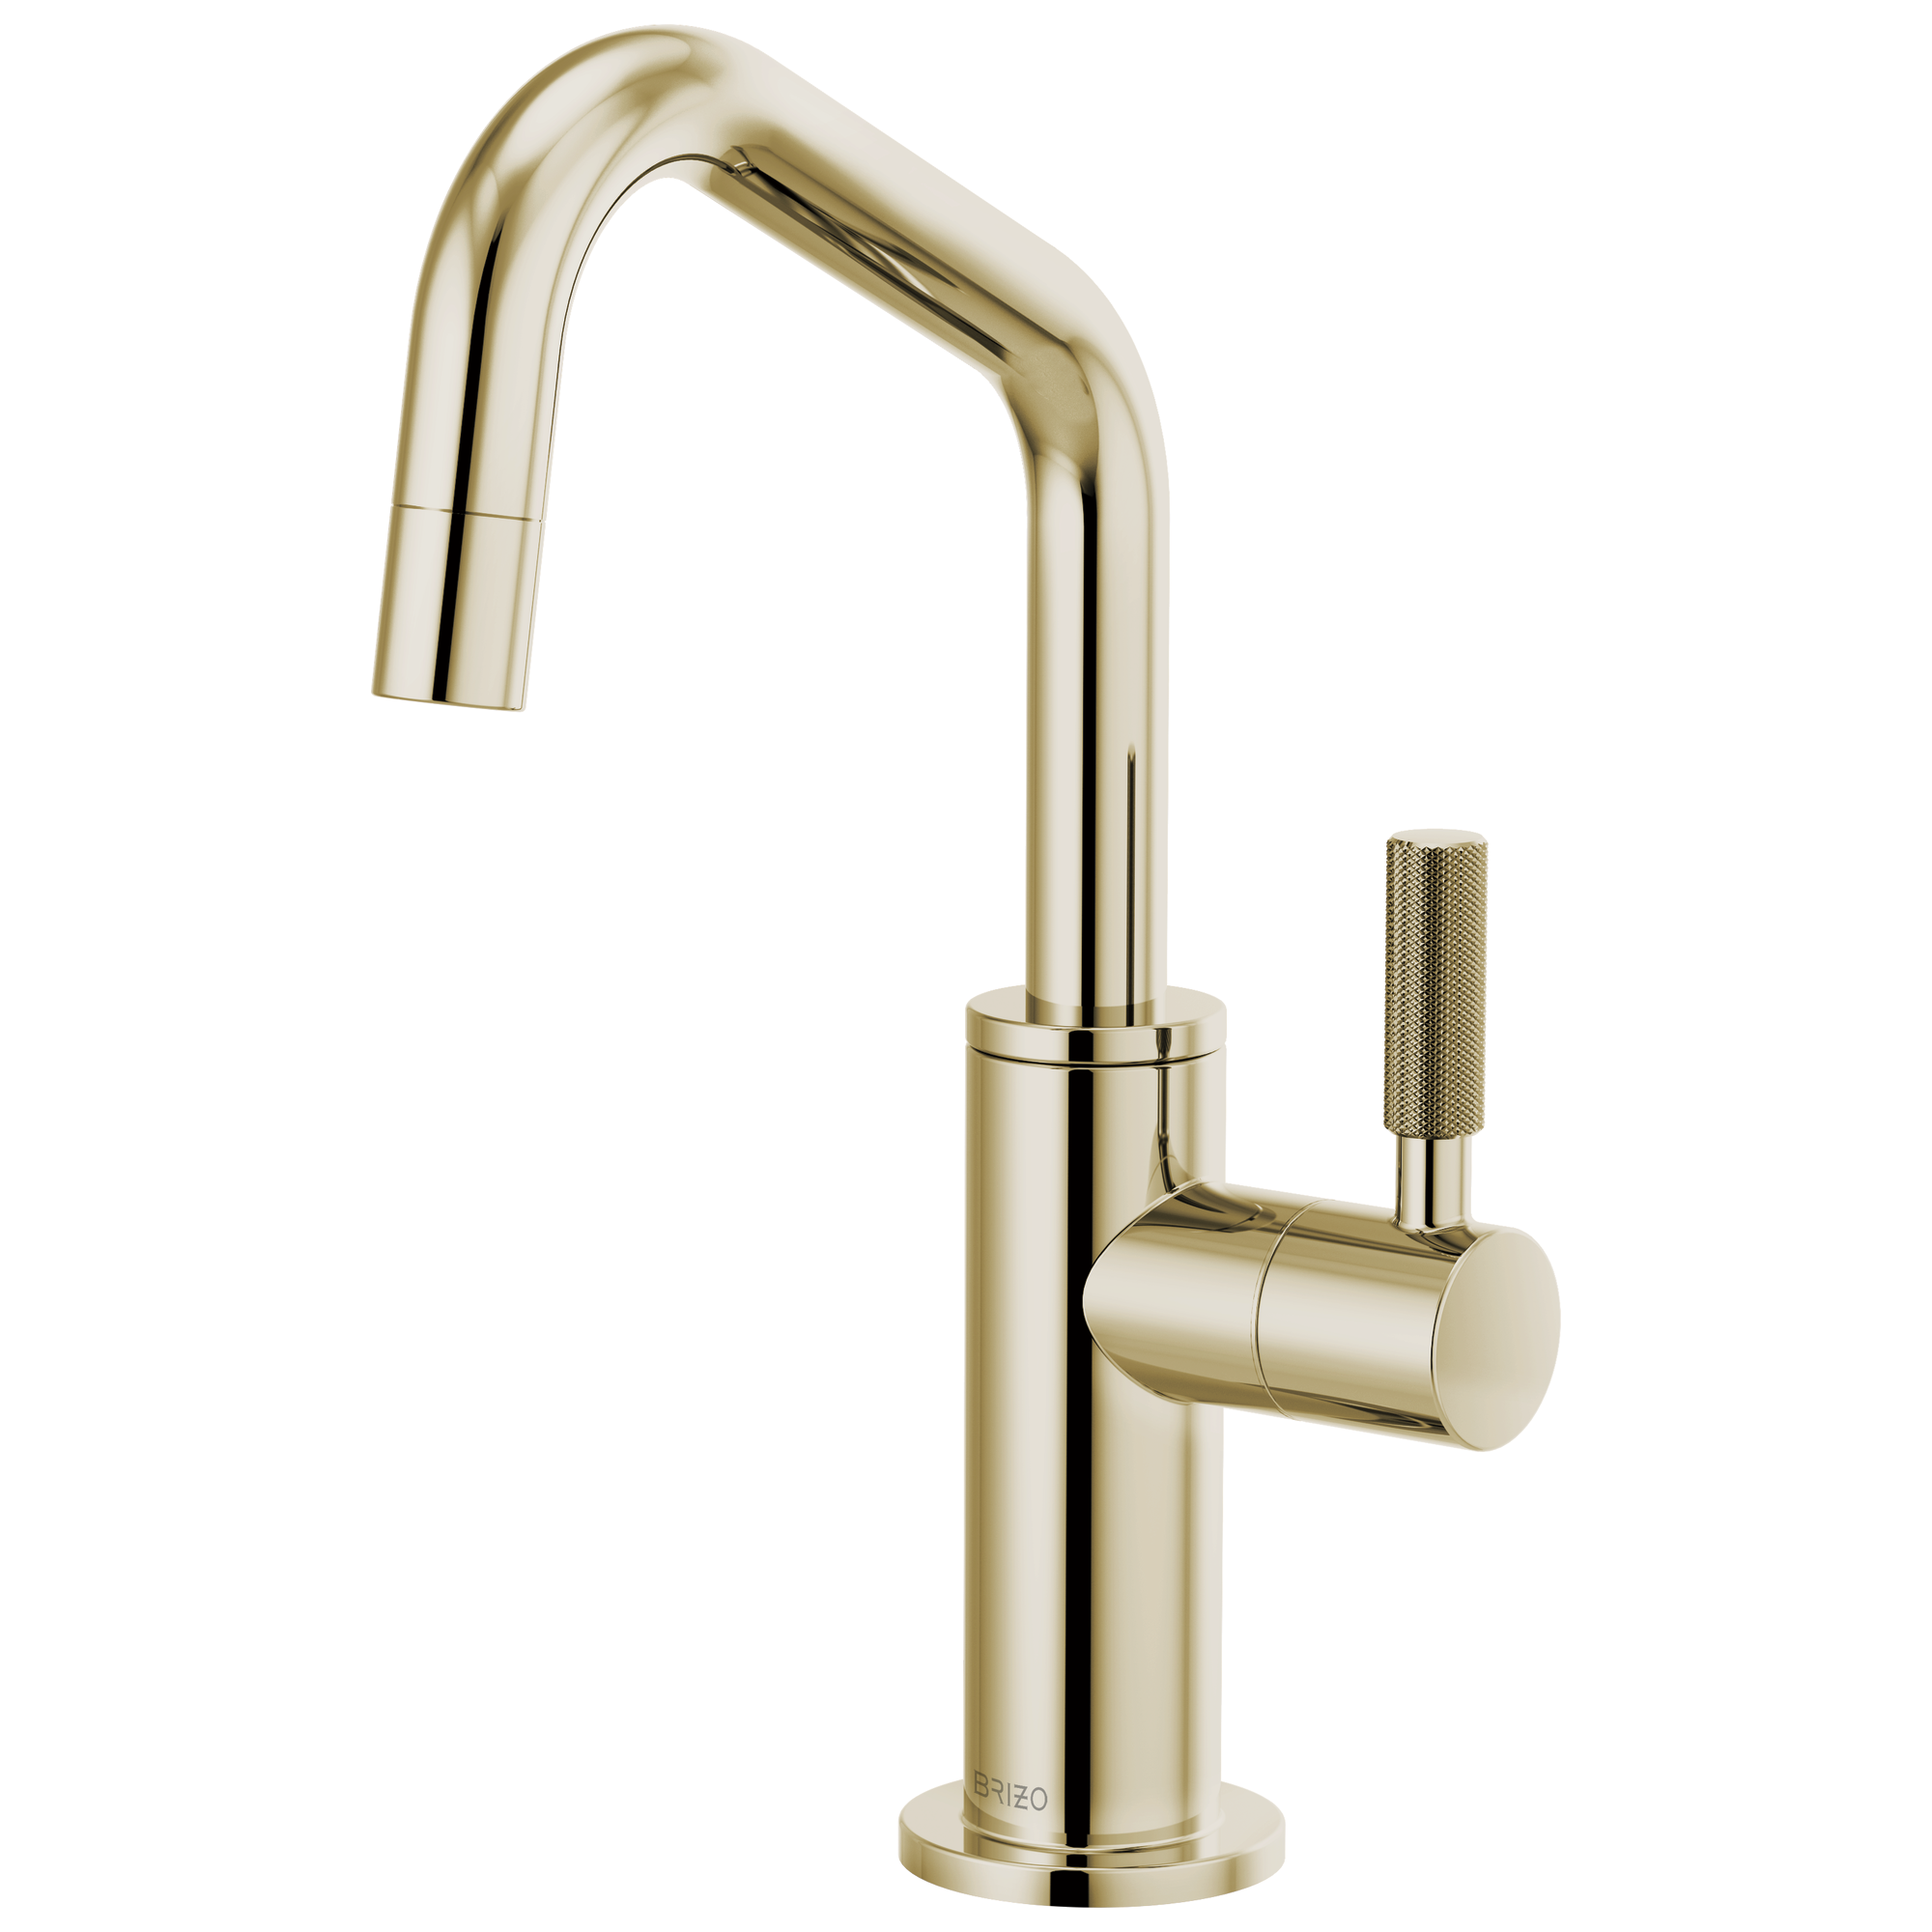 Brizo Litze Beverage Faucet with Angled Spout and Knurled Handle